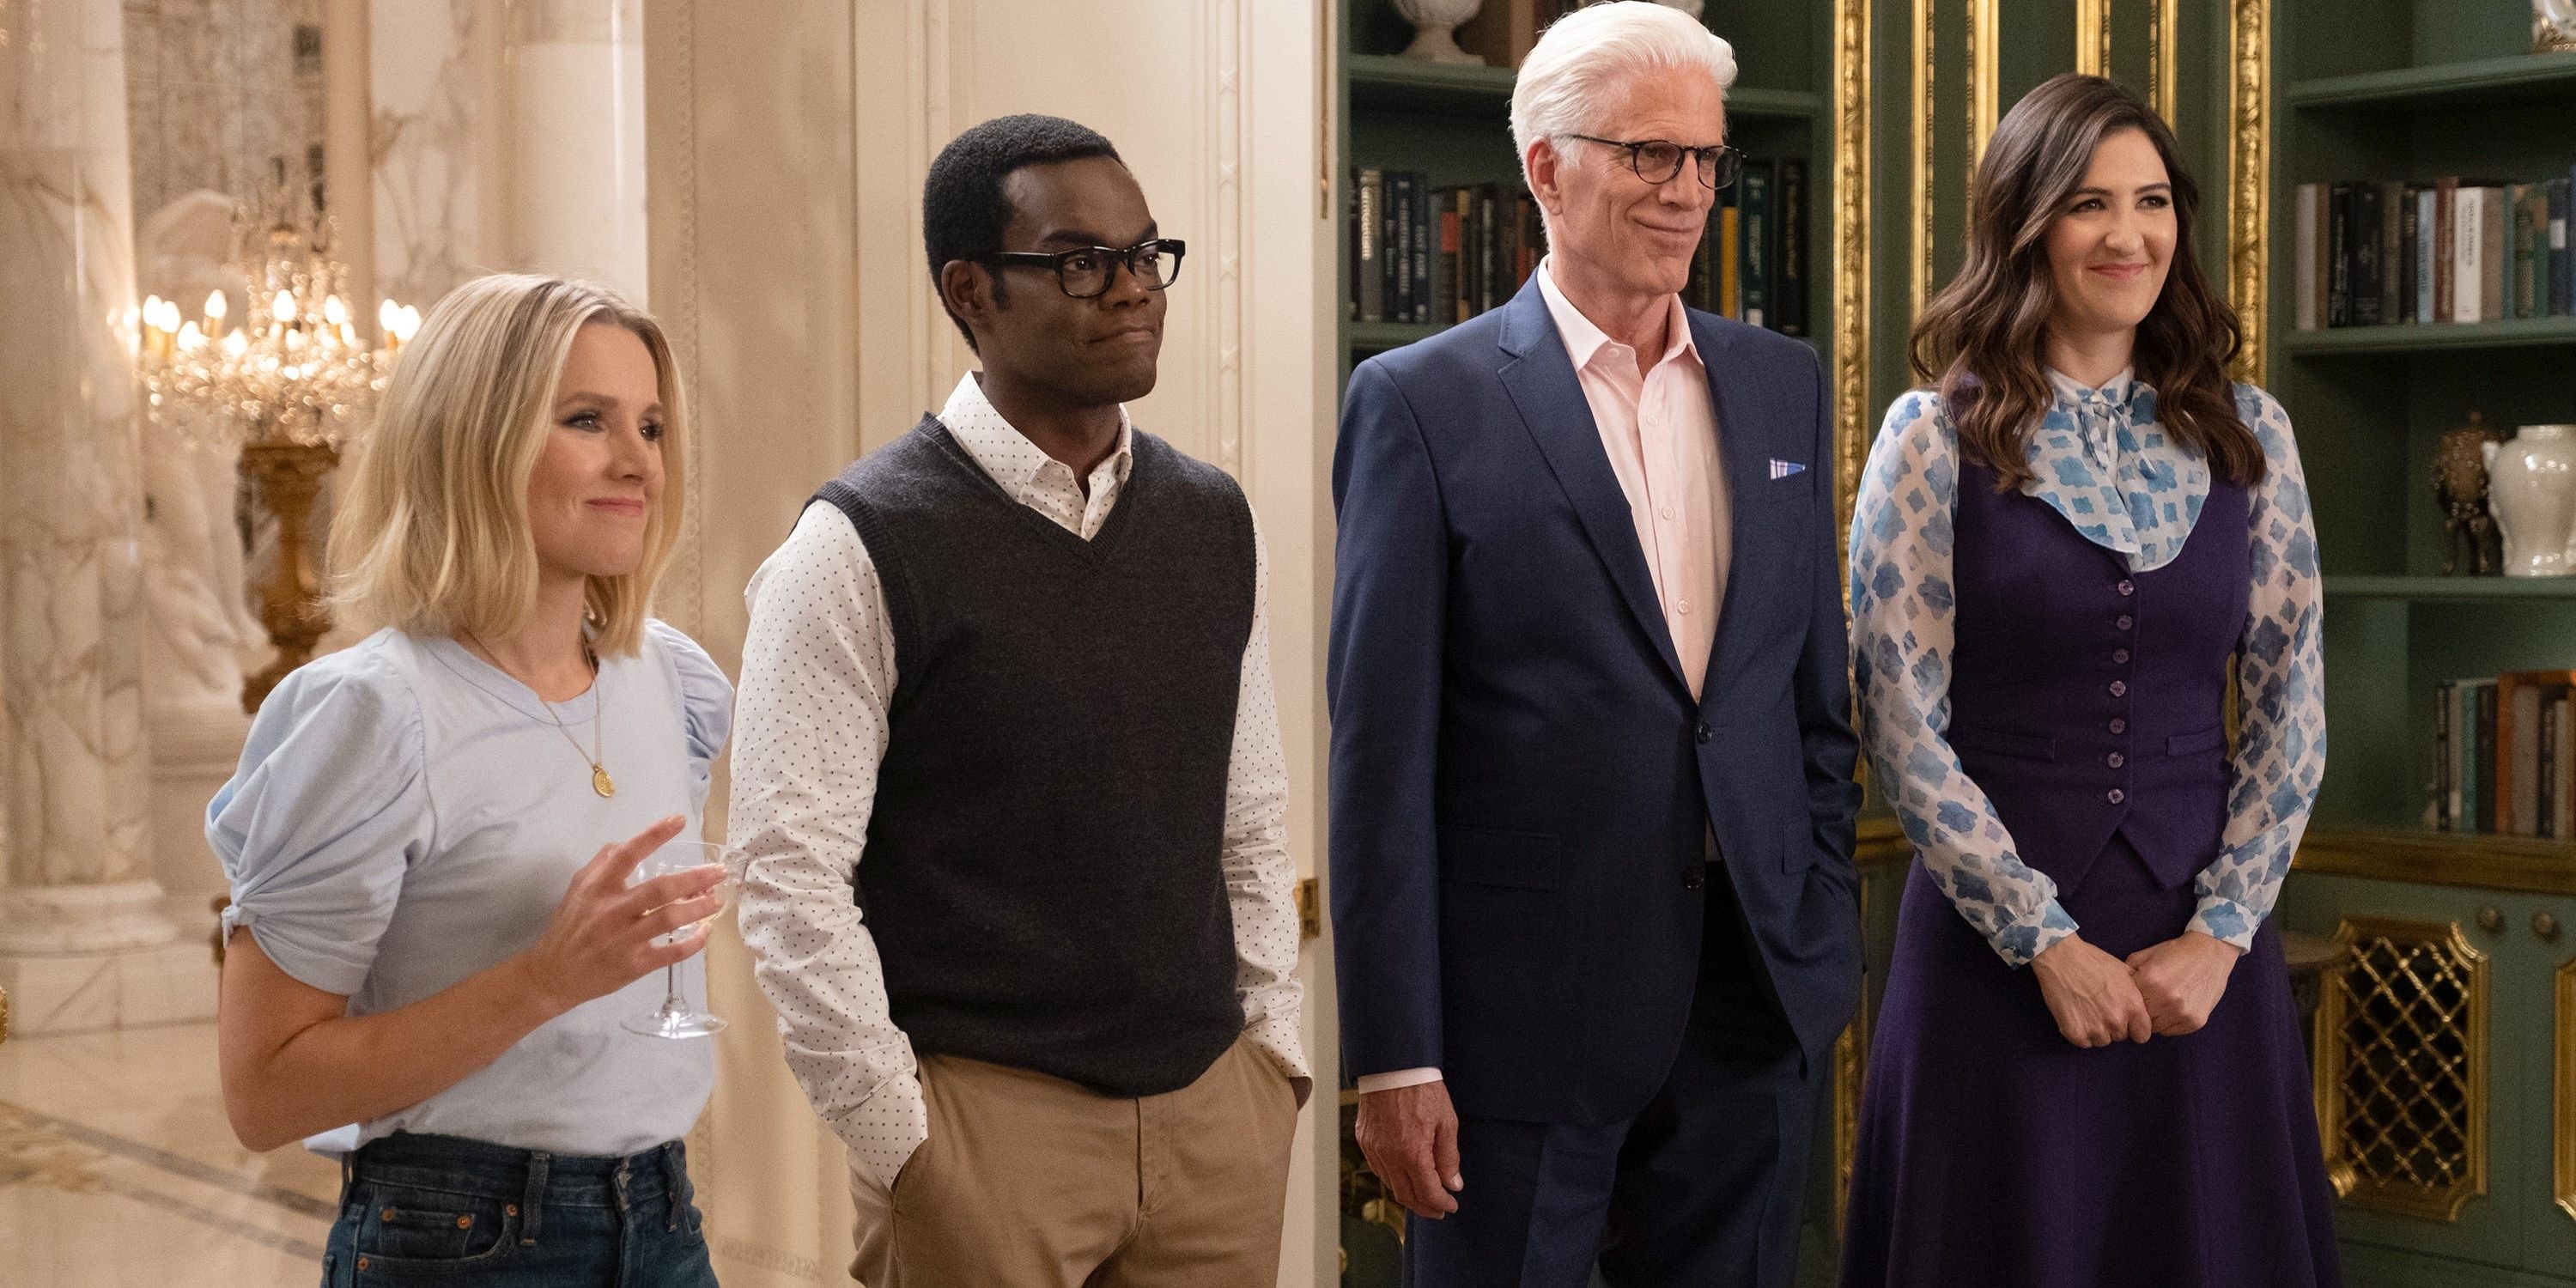 William Jackson Harper, Ted Danson, Kristen Bell, and D'Arcy Carden in The Good Place